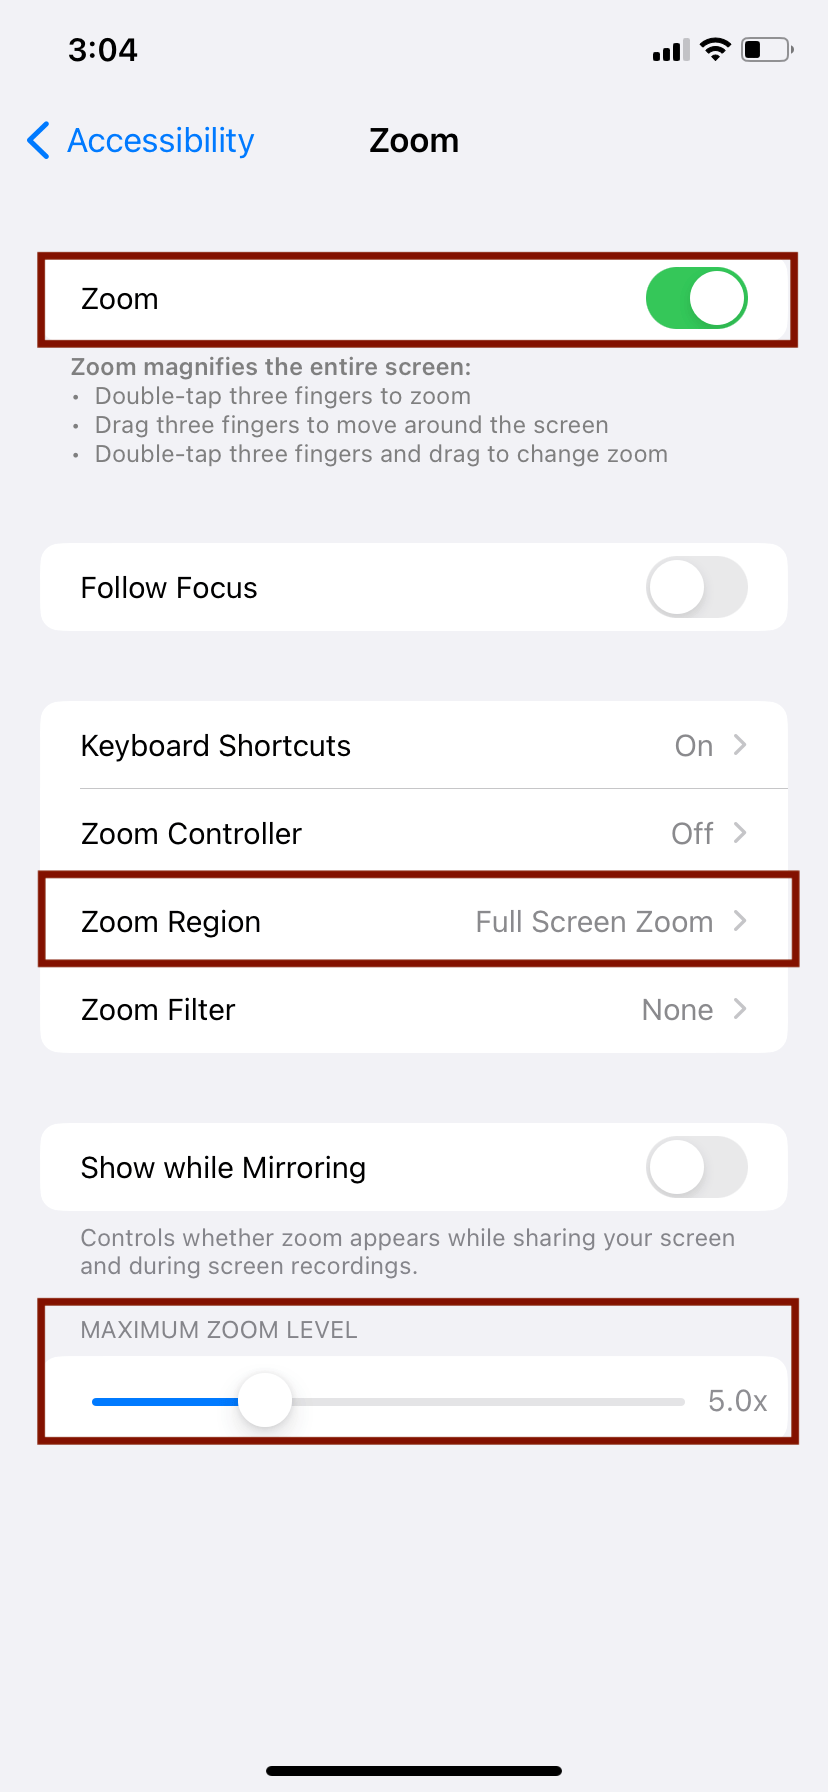 Screenshot of iPhone Zoom settings. Zoom is toggled on with the region full screen zoom selected, and the zoom level slider is set to 5x.